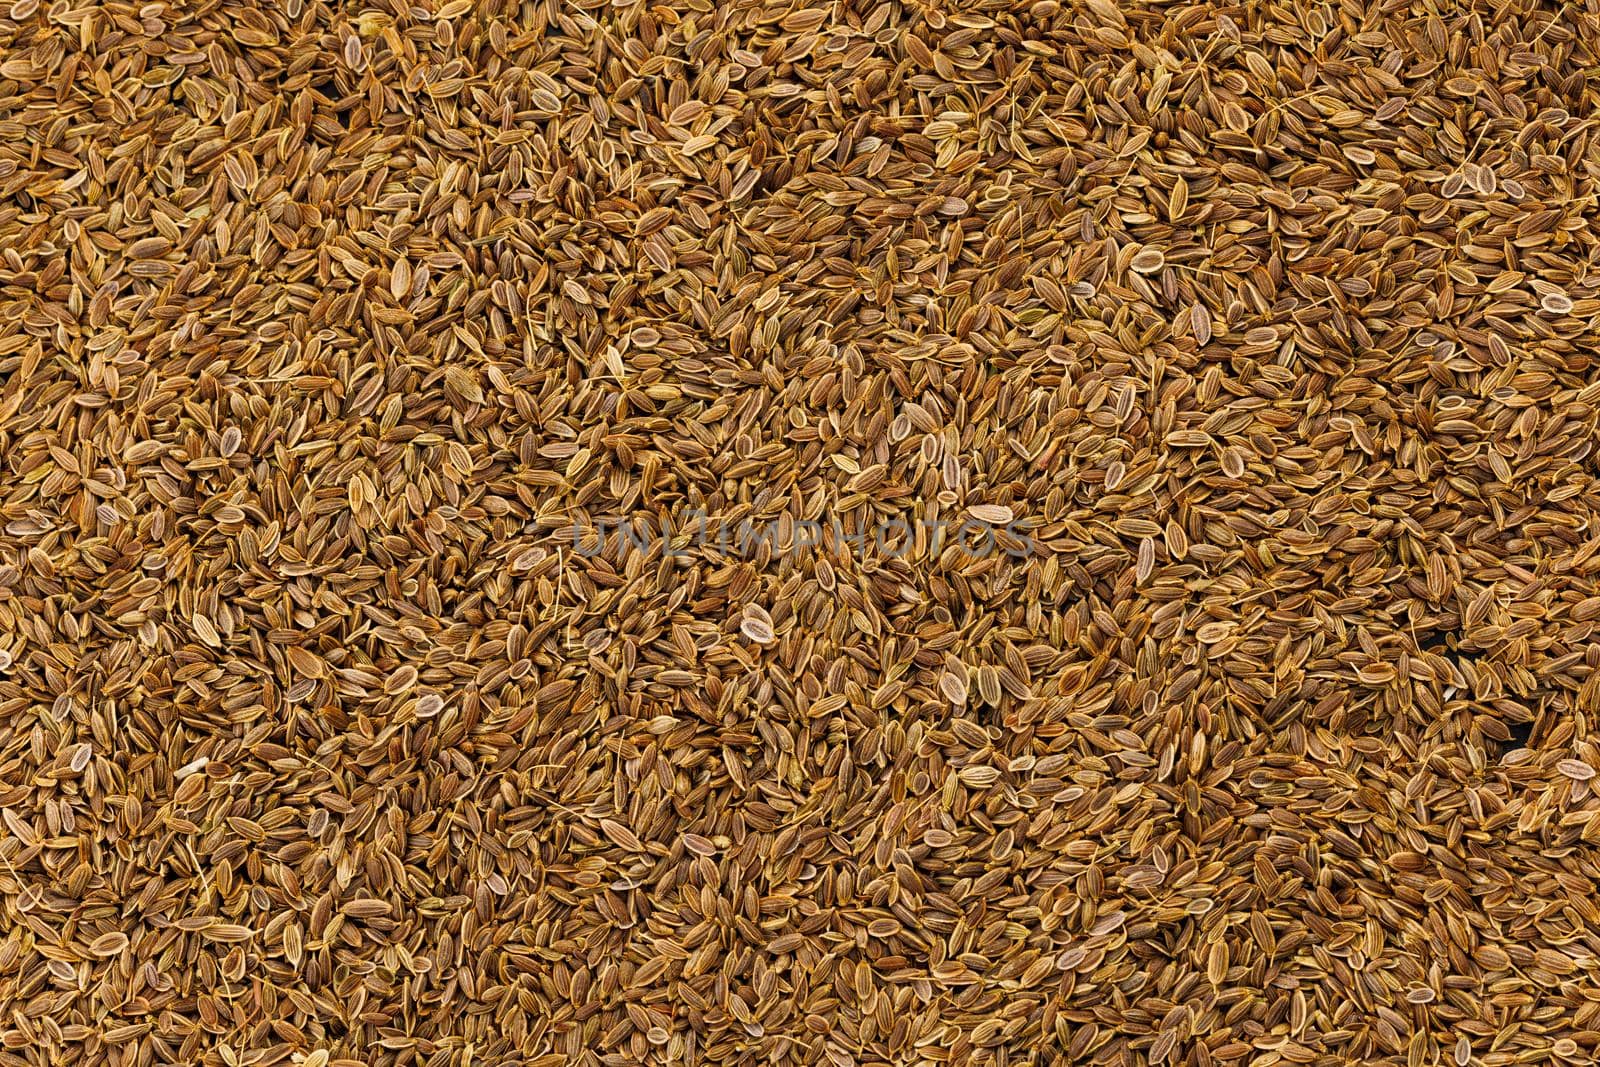 dry dill seeds on flat surface, flat texture and full-frame background by z1b